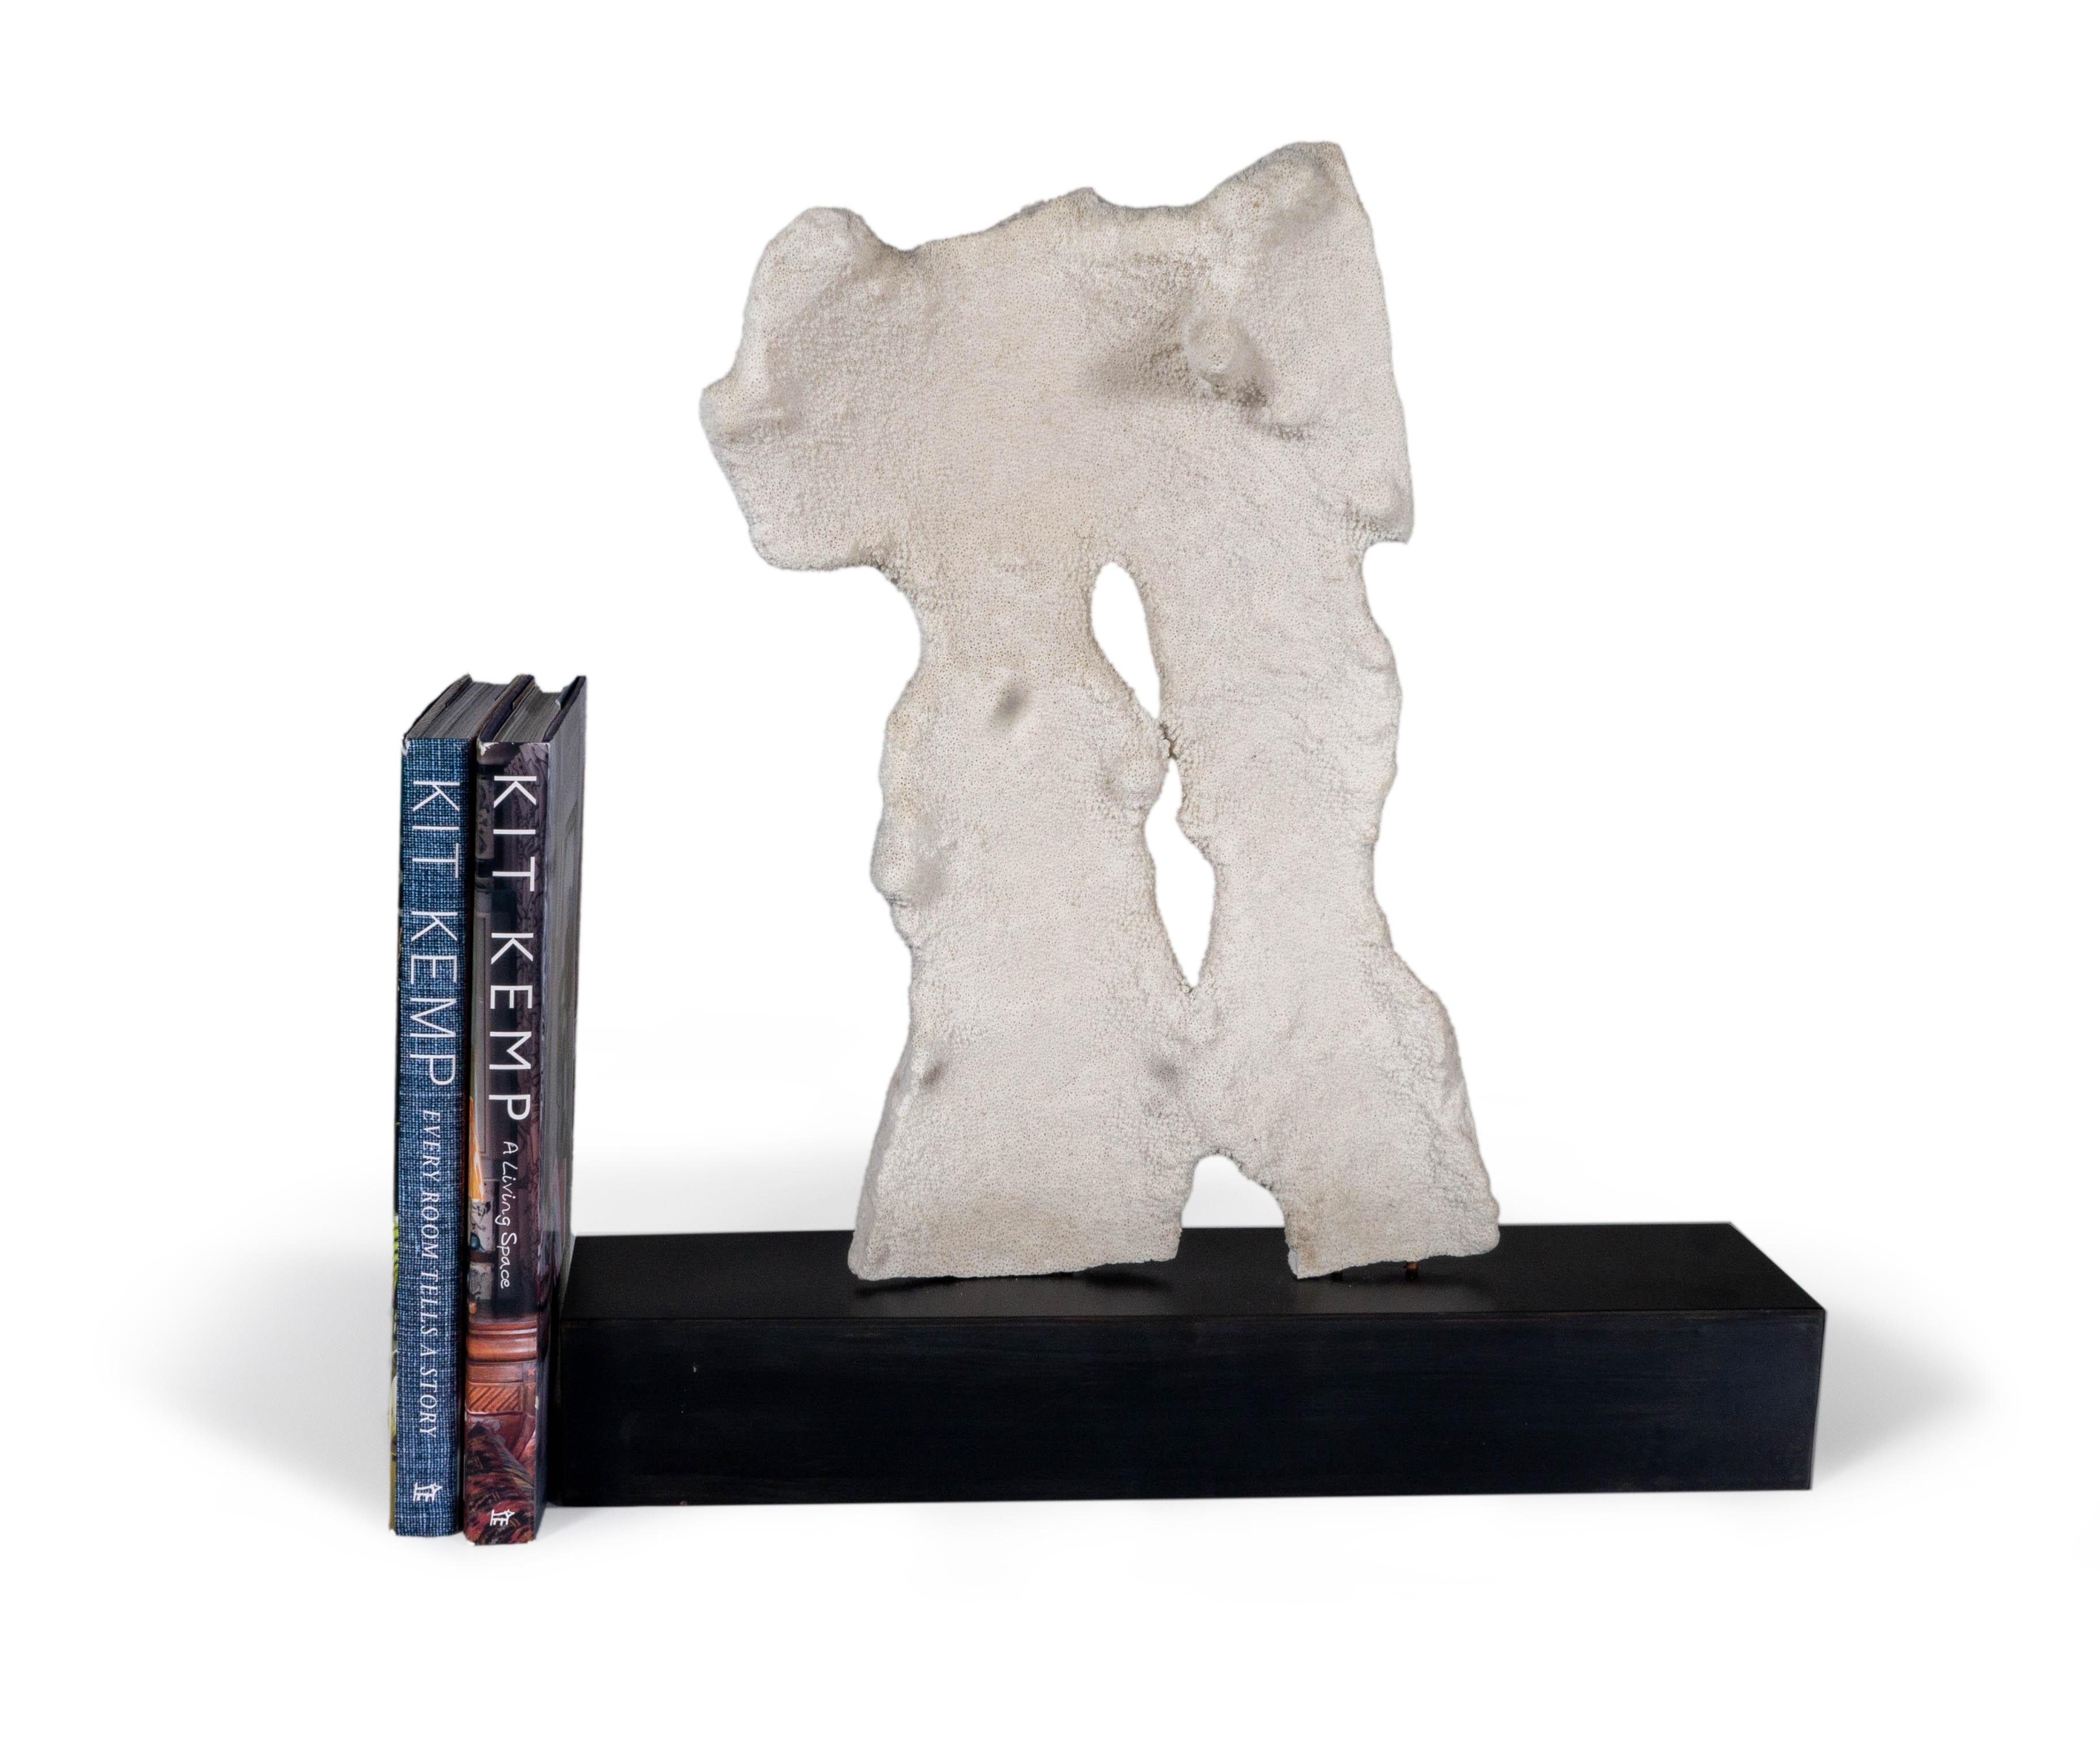 This sculpture combines the beauty of coral and oxidized metal. A perfect combination of natural elements and home decor pieces, this sculpture will take your living space to the next level. A perfectly balanced pairing of manmade and natural